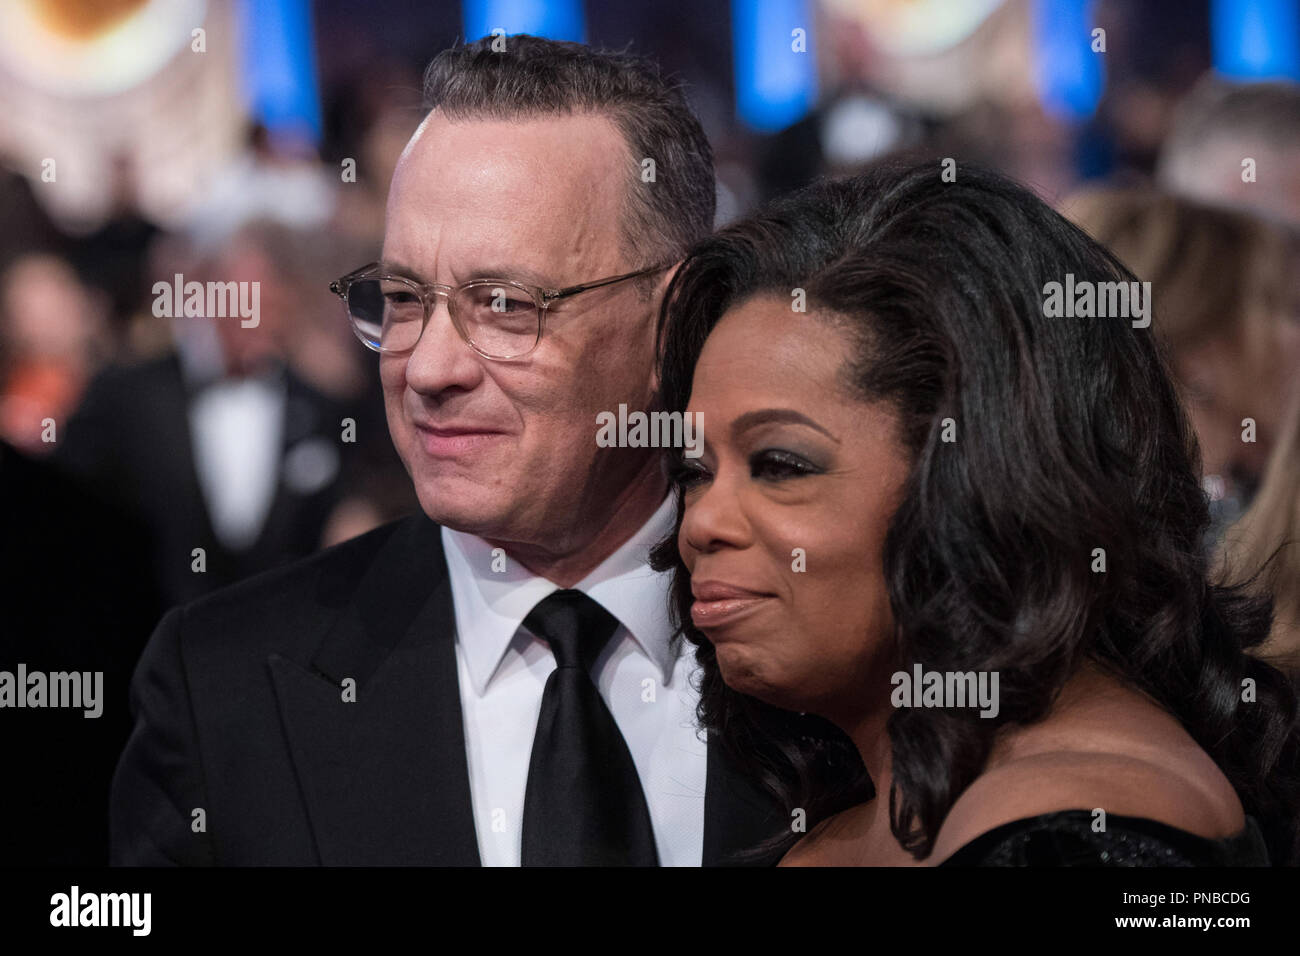 Tom Hanks and the Cecil B. DeMille Award recipient Oprah Winfrey at the 75th Annual Golden Globe Awards at the Beverly Hilton in Beverly Hills, CA on Sunday, January 7, 2018.  File Reference # 33508 633JRC  For Editorial Use Only -  All Rights Reserved Stock Photo